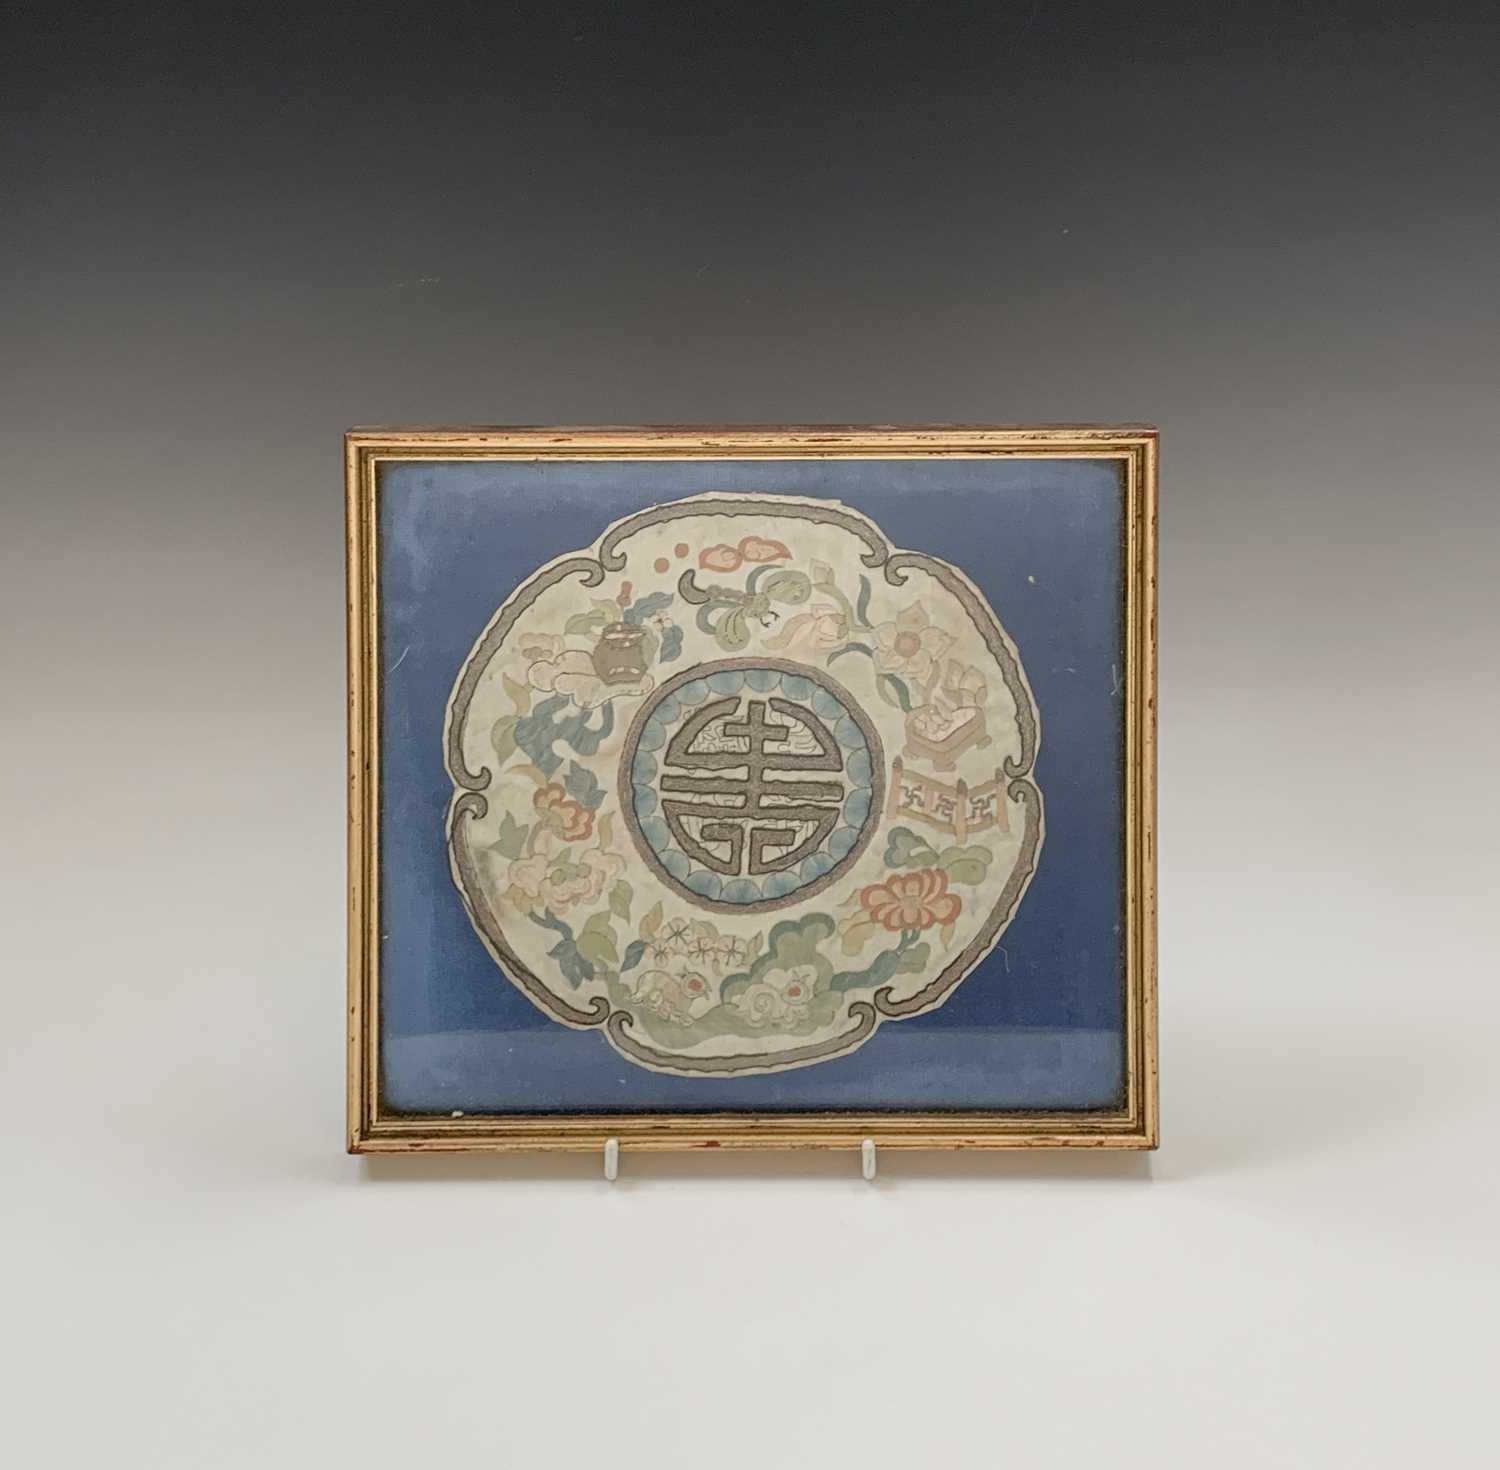 A Chinese circular silkwork embroidery, 19th century, frame size 24.5 x 27cm.